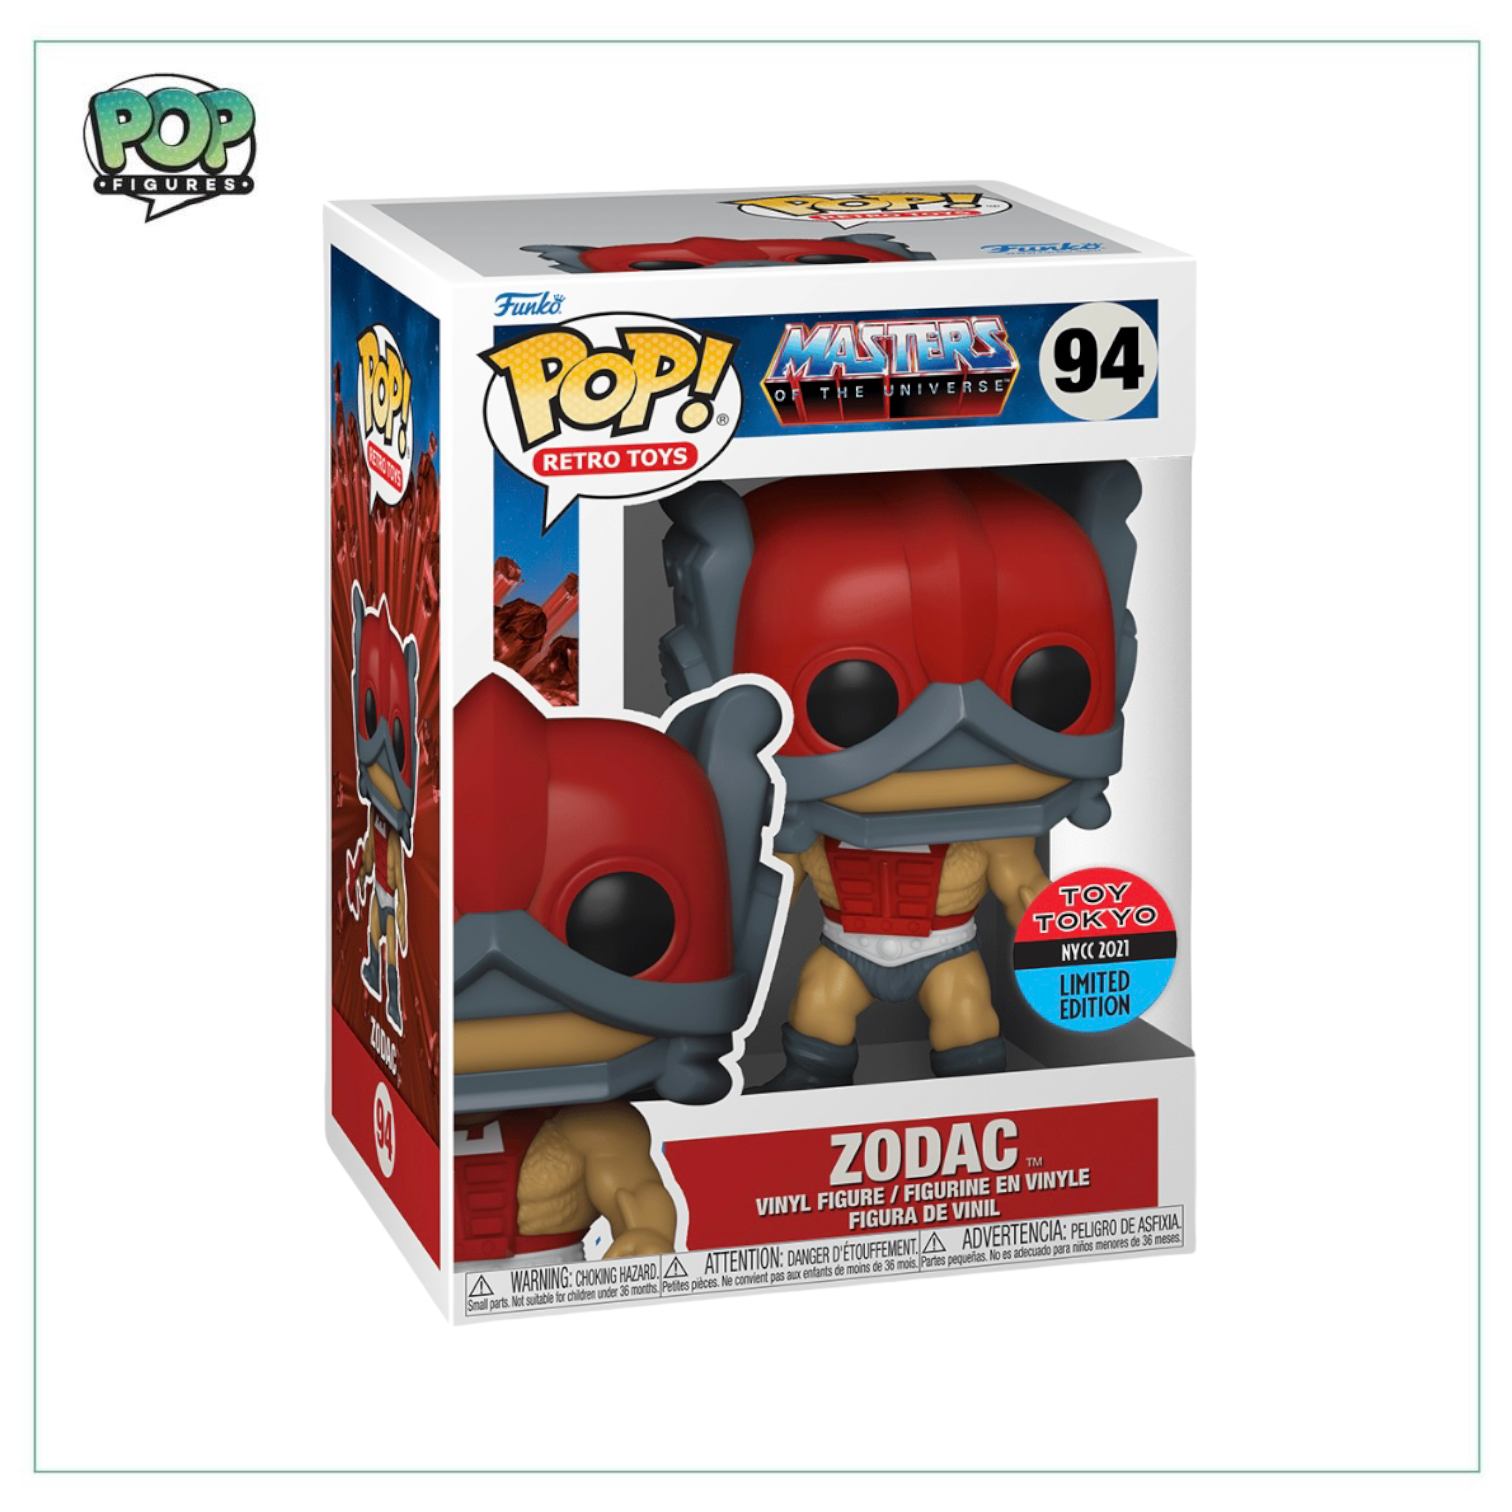 Zodac #94 Funko Pop! Masters of the Universe -  Toy Tokyo NYCC 2021 Exclusive